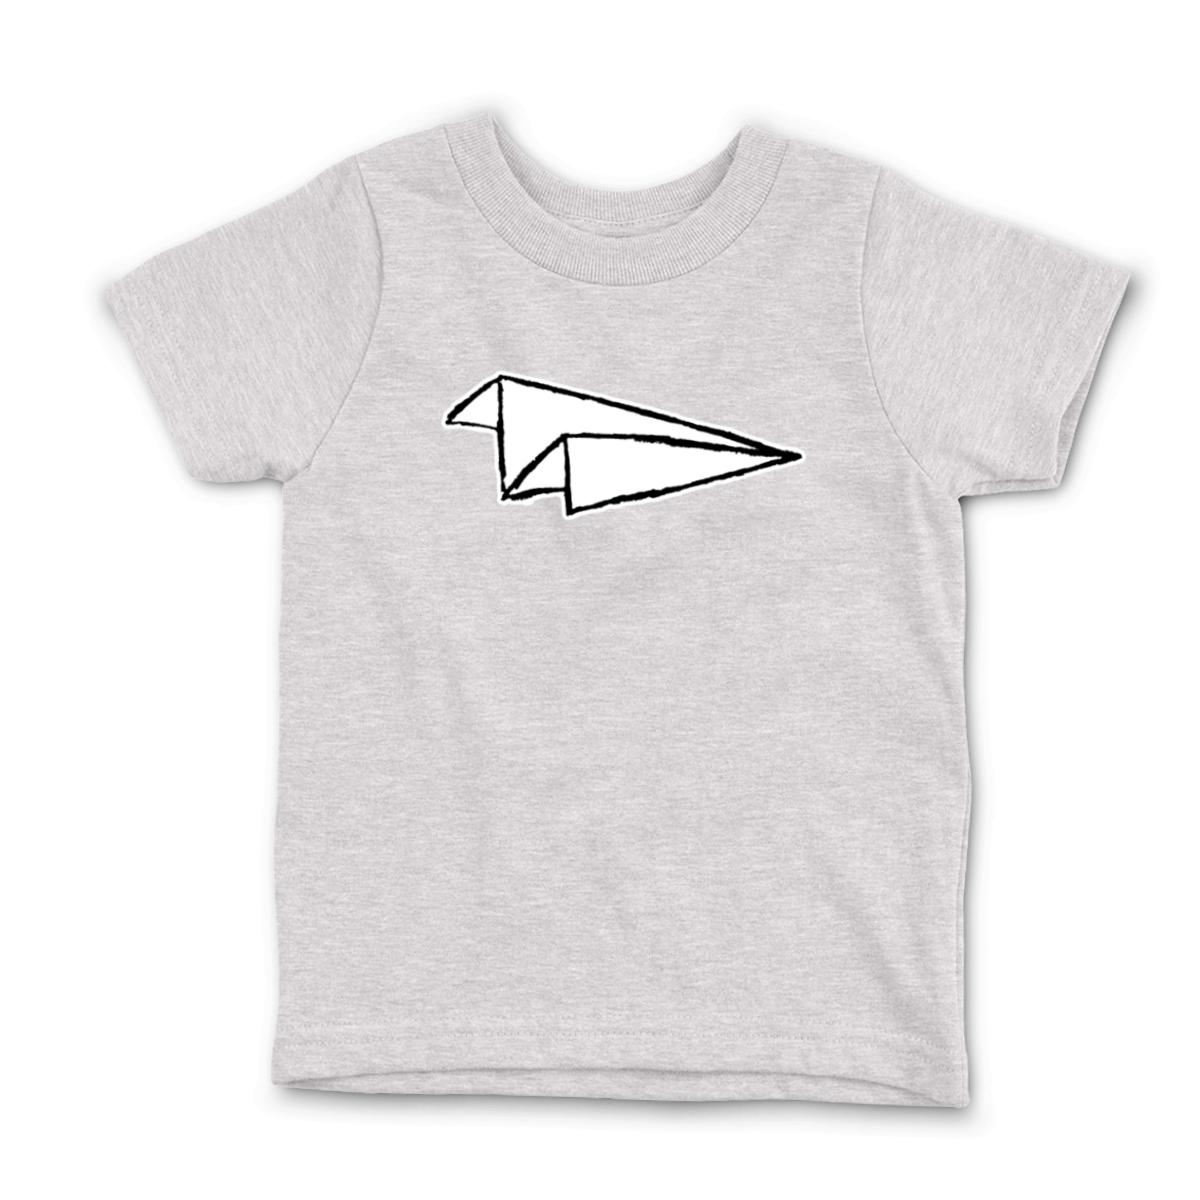 Airplane Sketch Kid's Tee Small heather